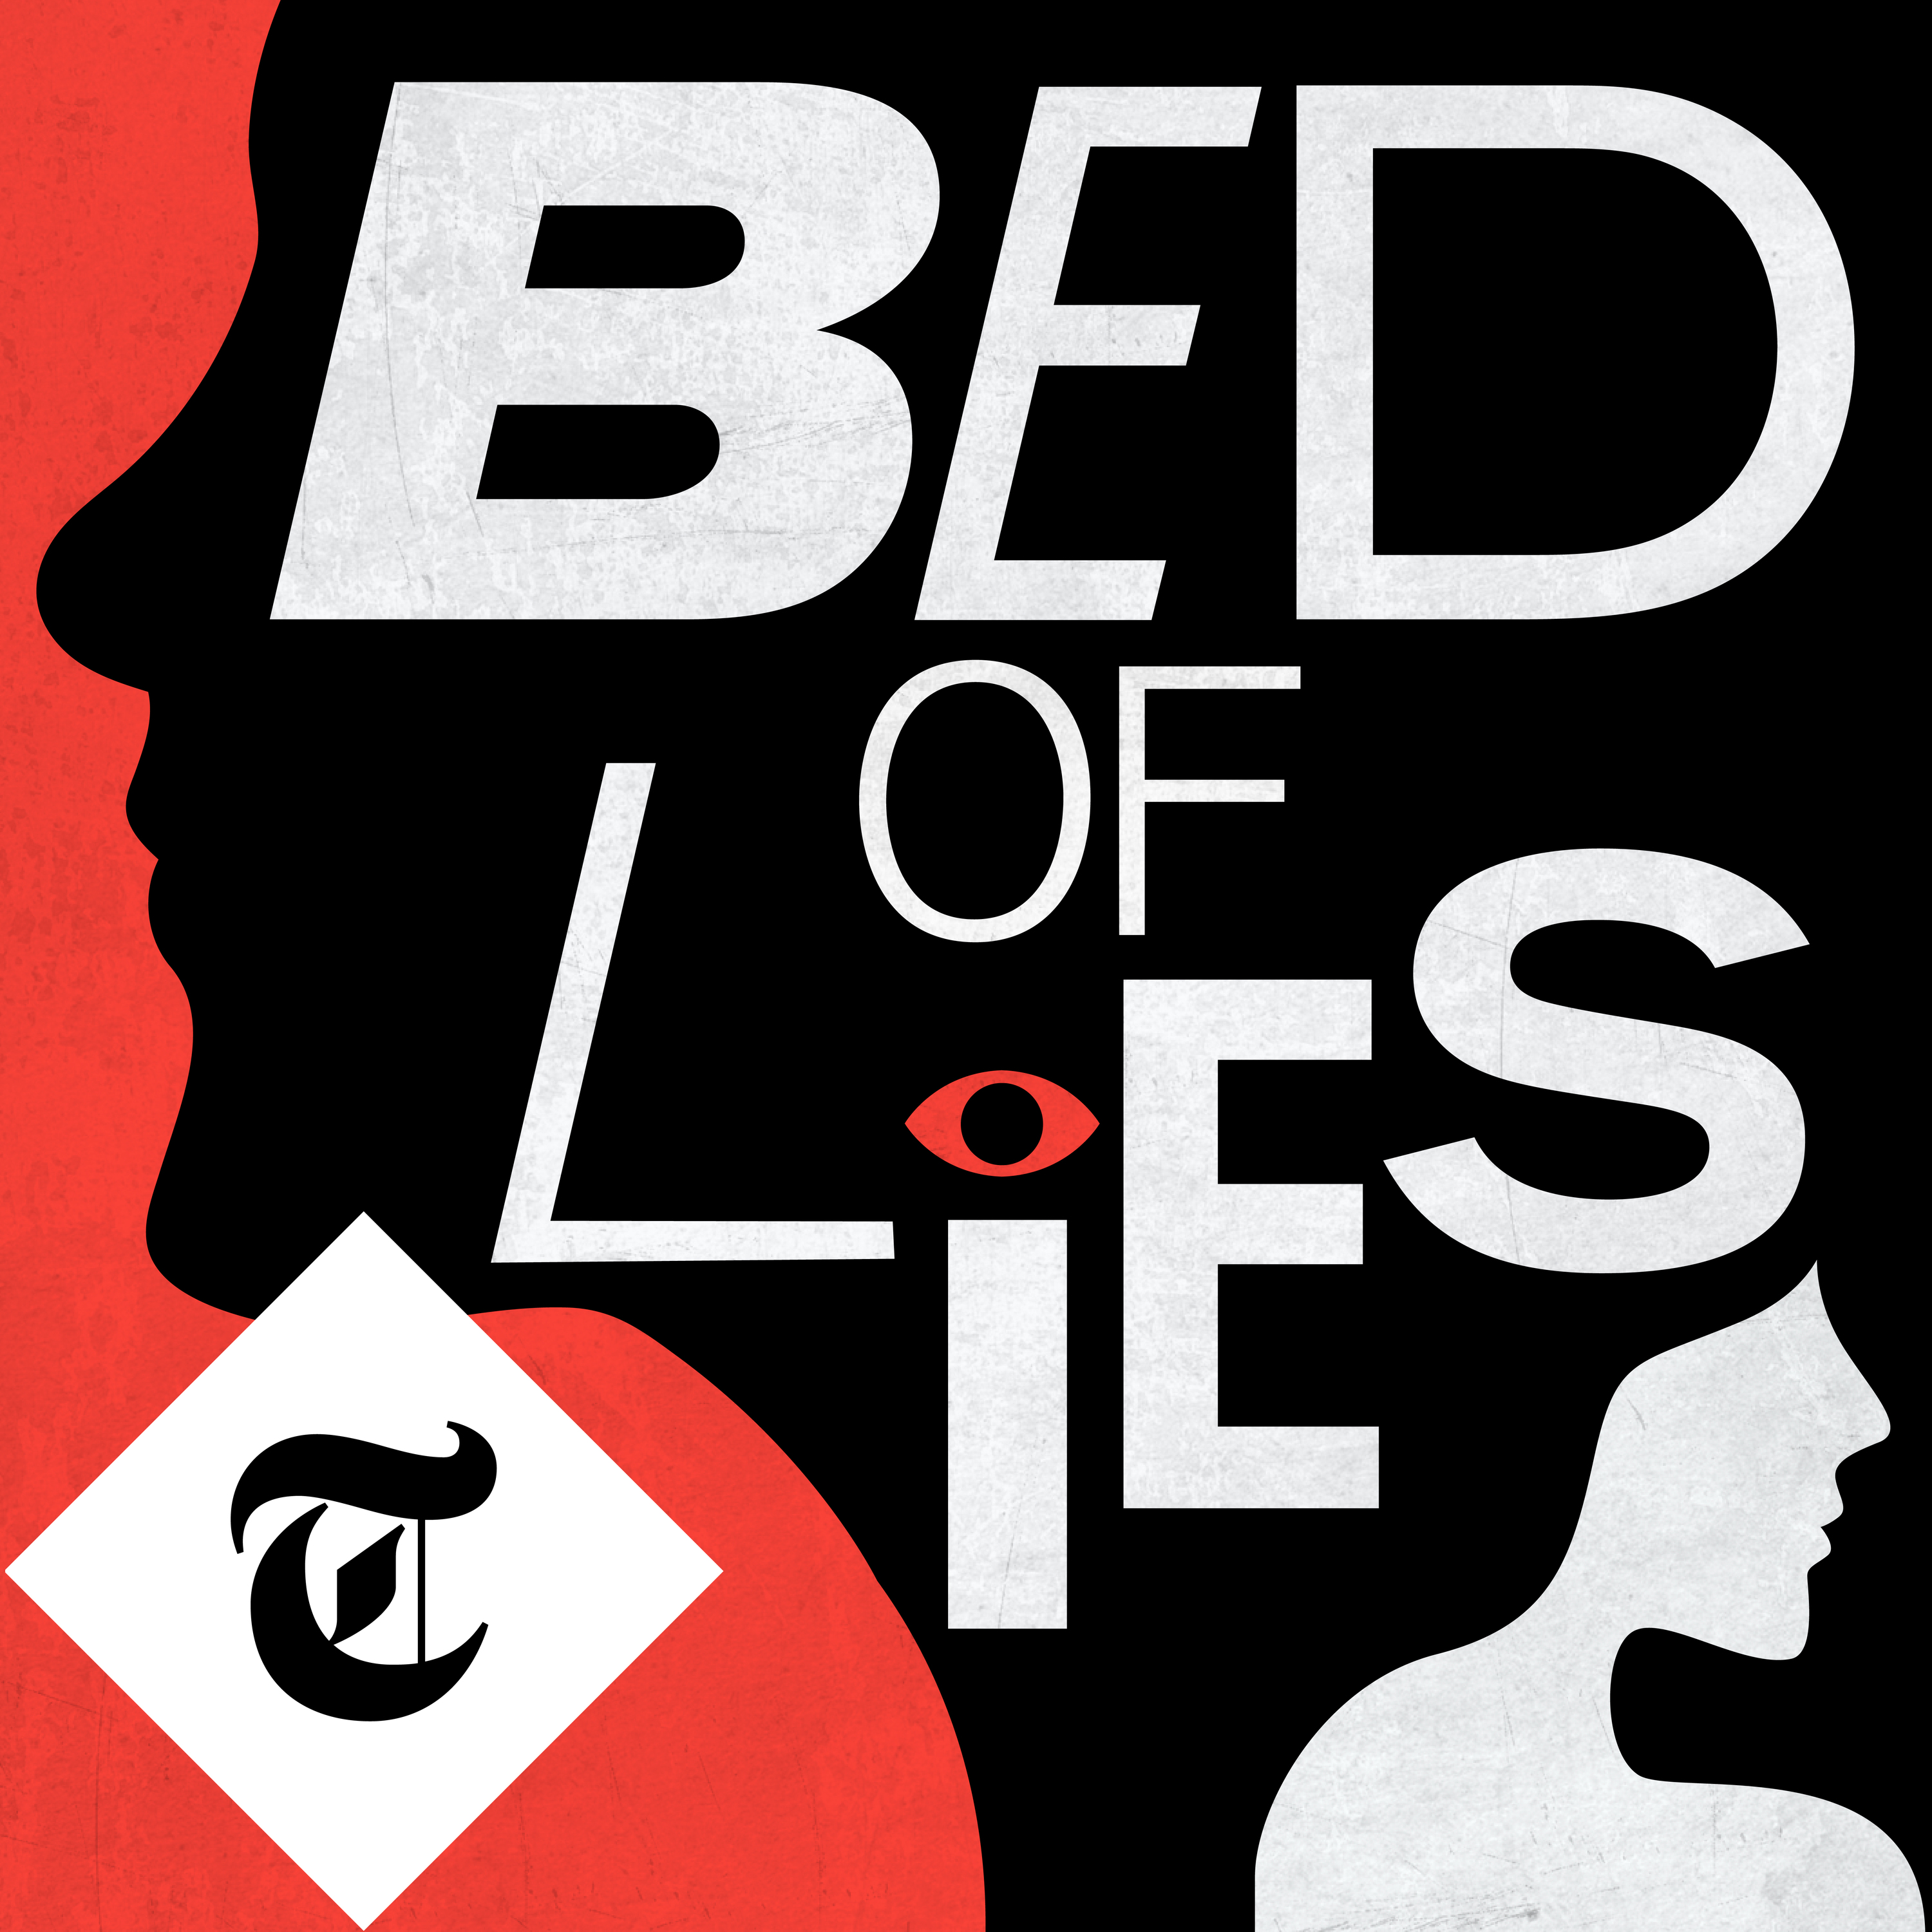 Introducing Bed of Lies: Love